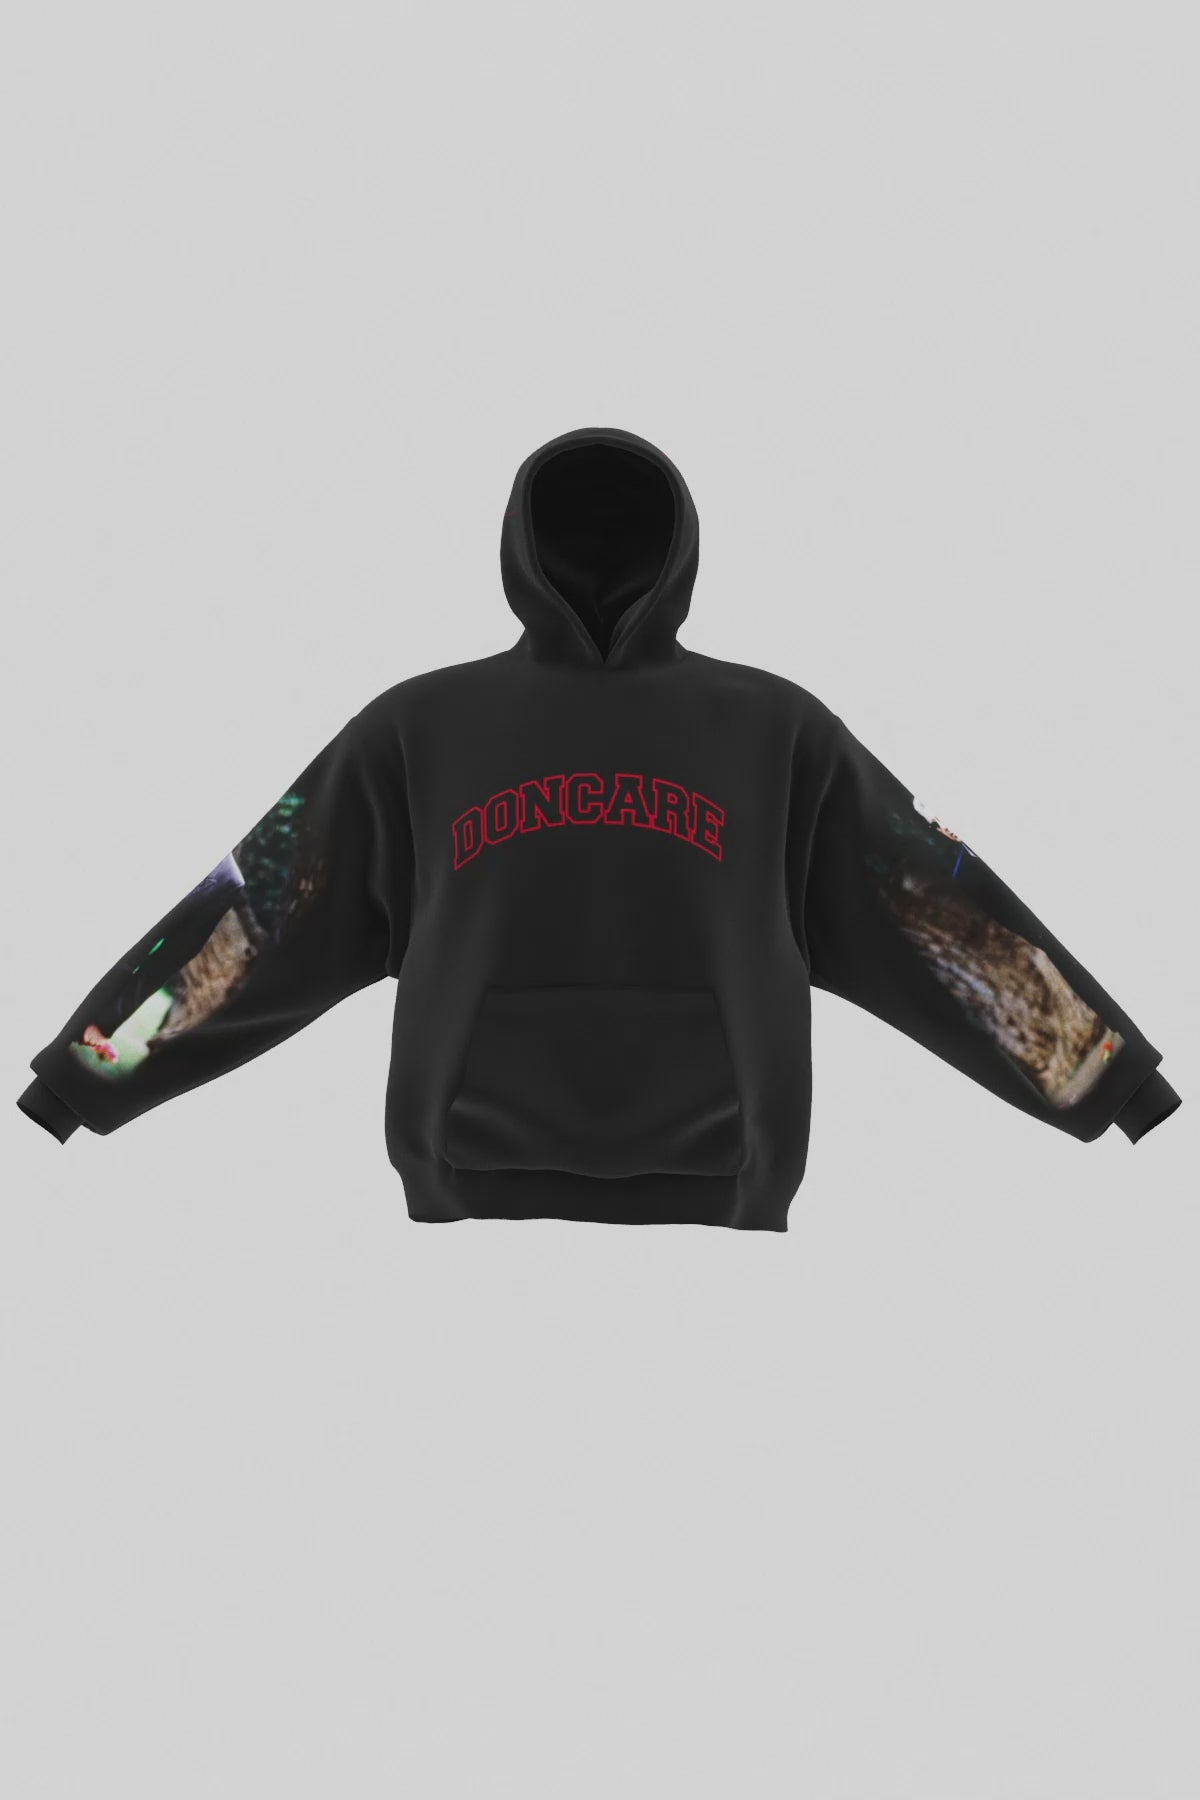 DONCARE "GodFather Hoodie"